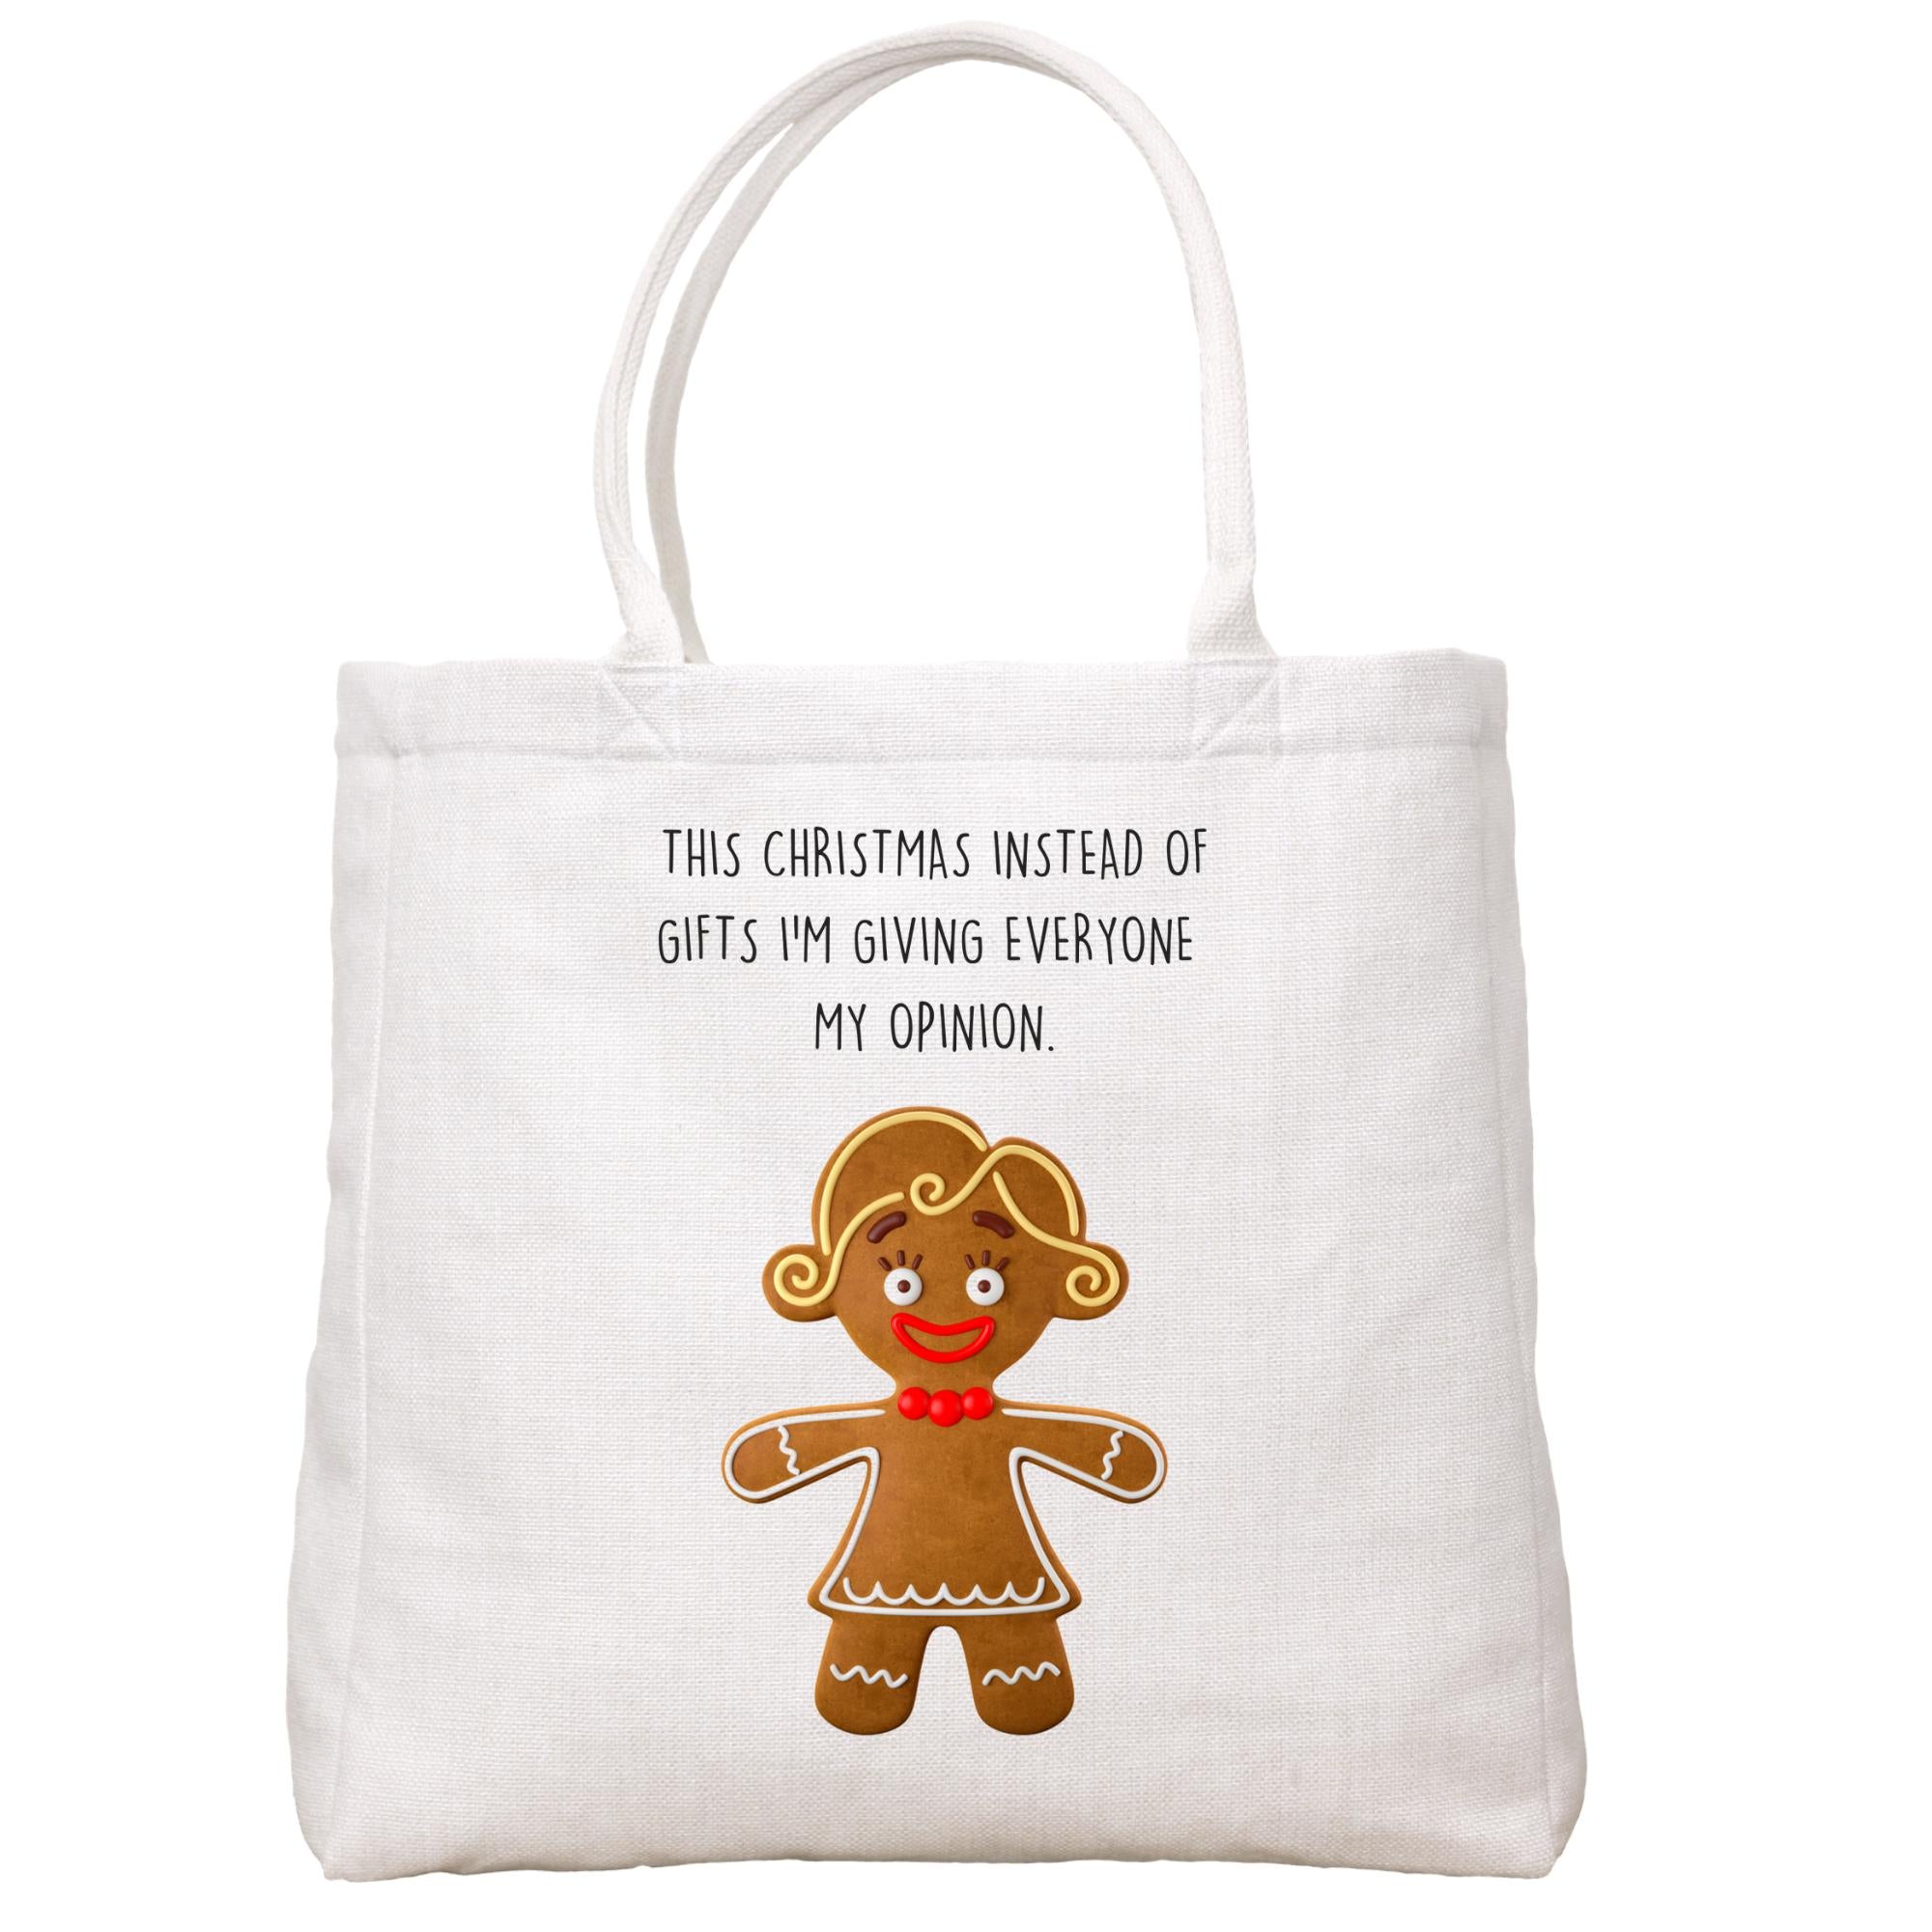 My Opinion Tote Bag Tote Bag - Southern Sisters